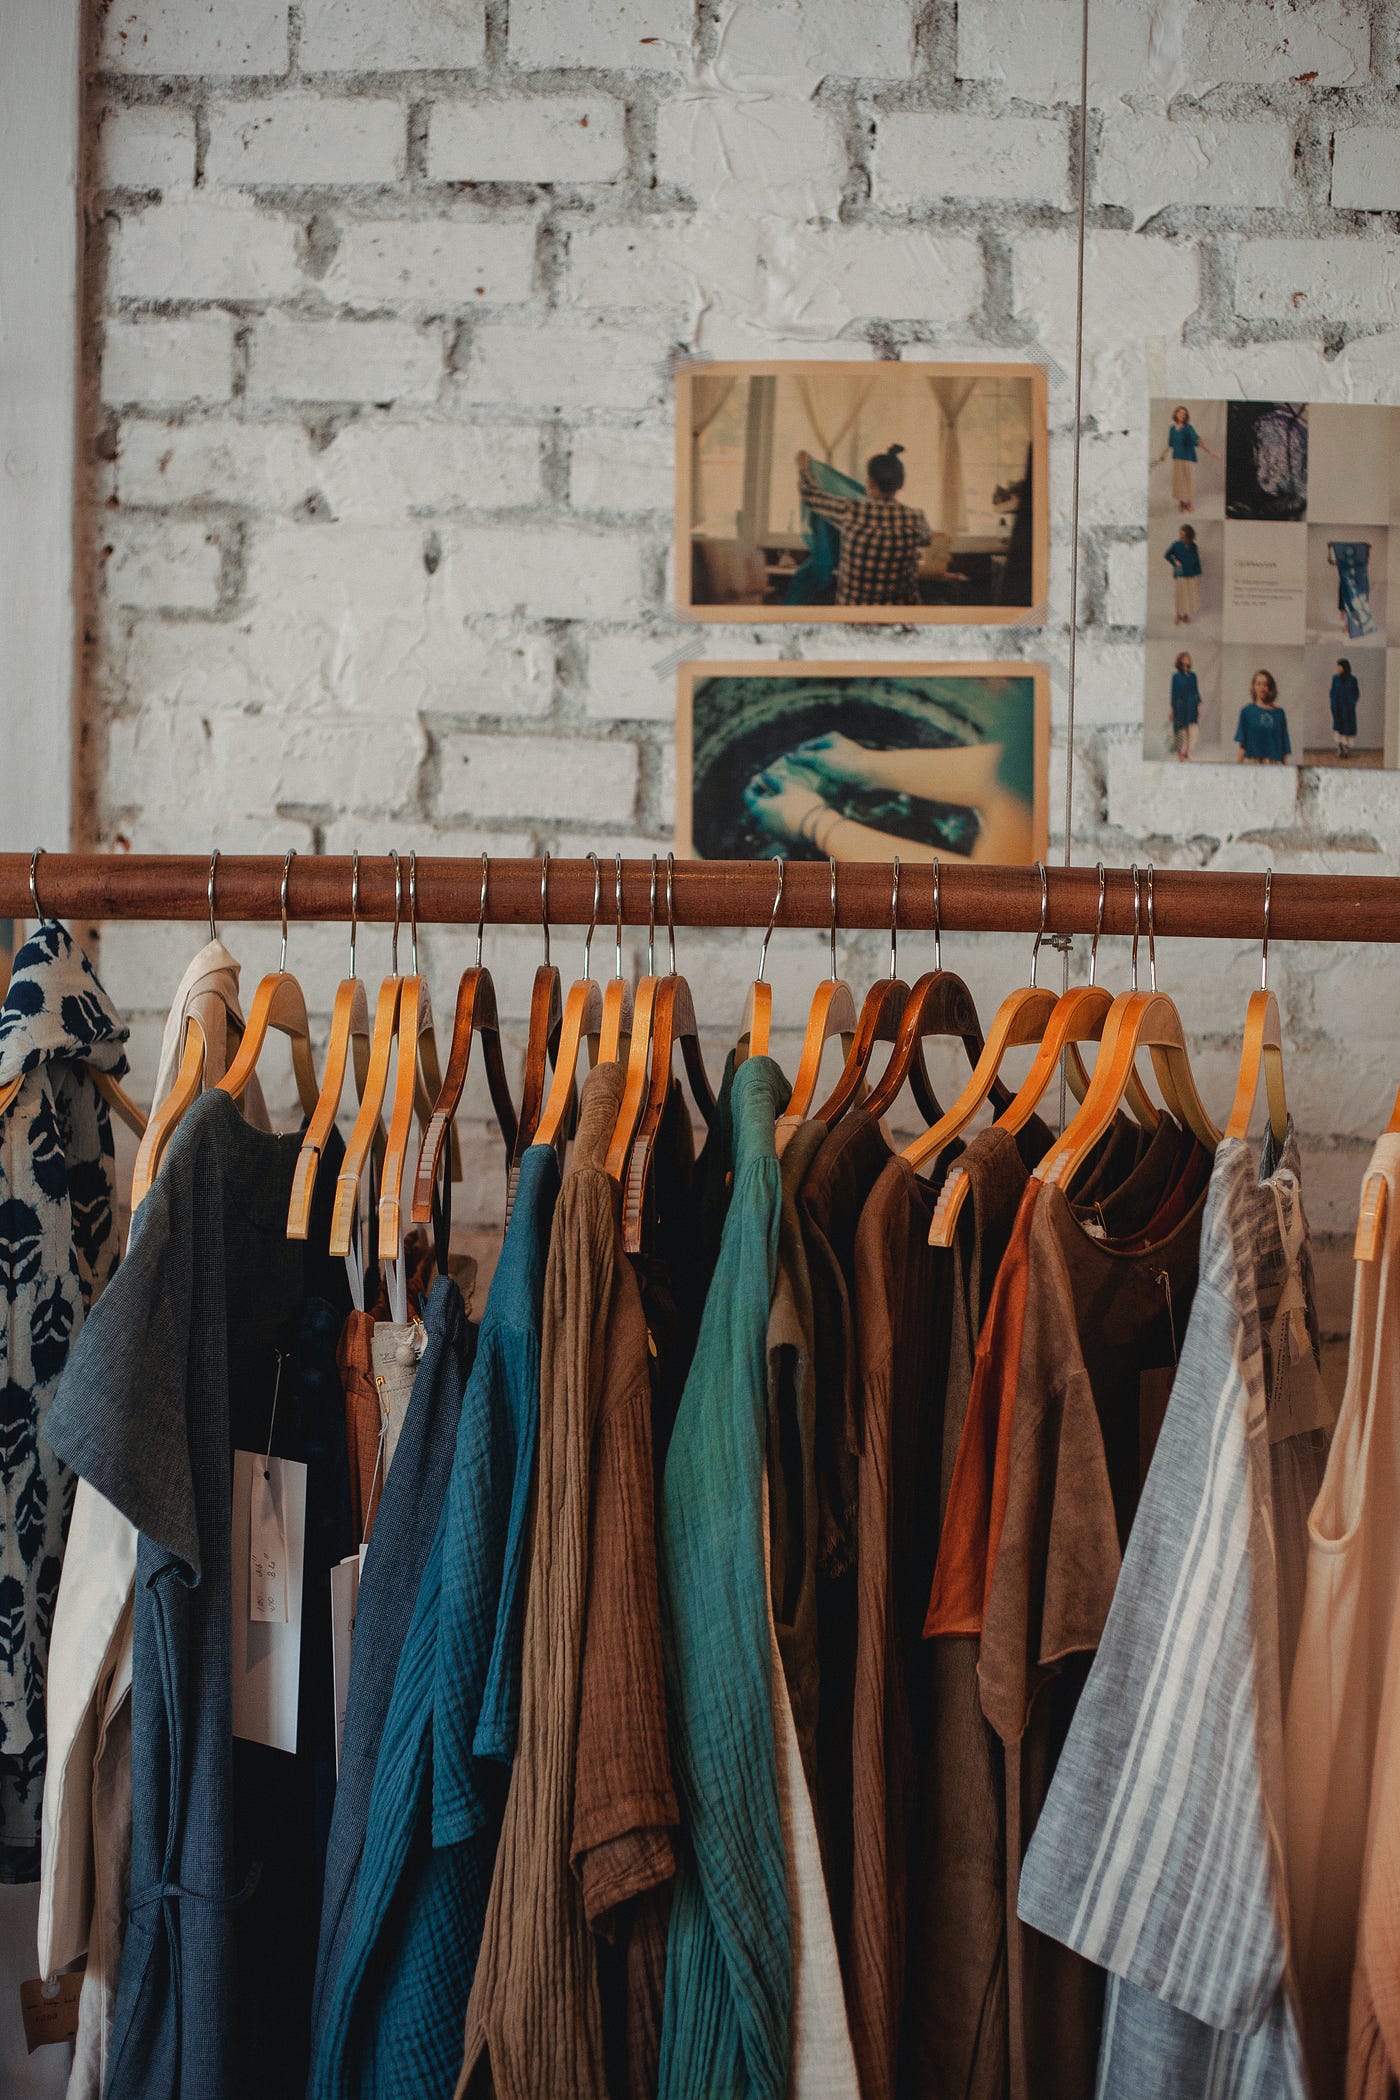 The Dark Side Of Used Clothing & Thrift Stores | by Eric S Burdon |  Purposeful Life | Medium